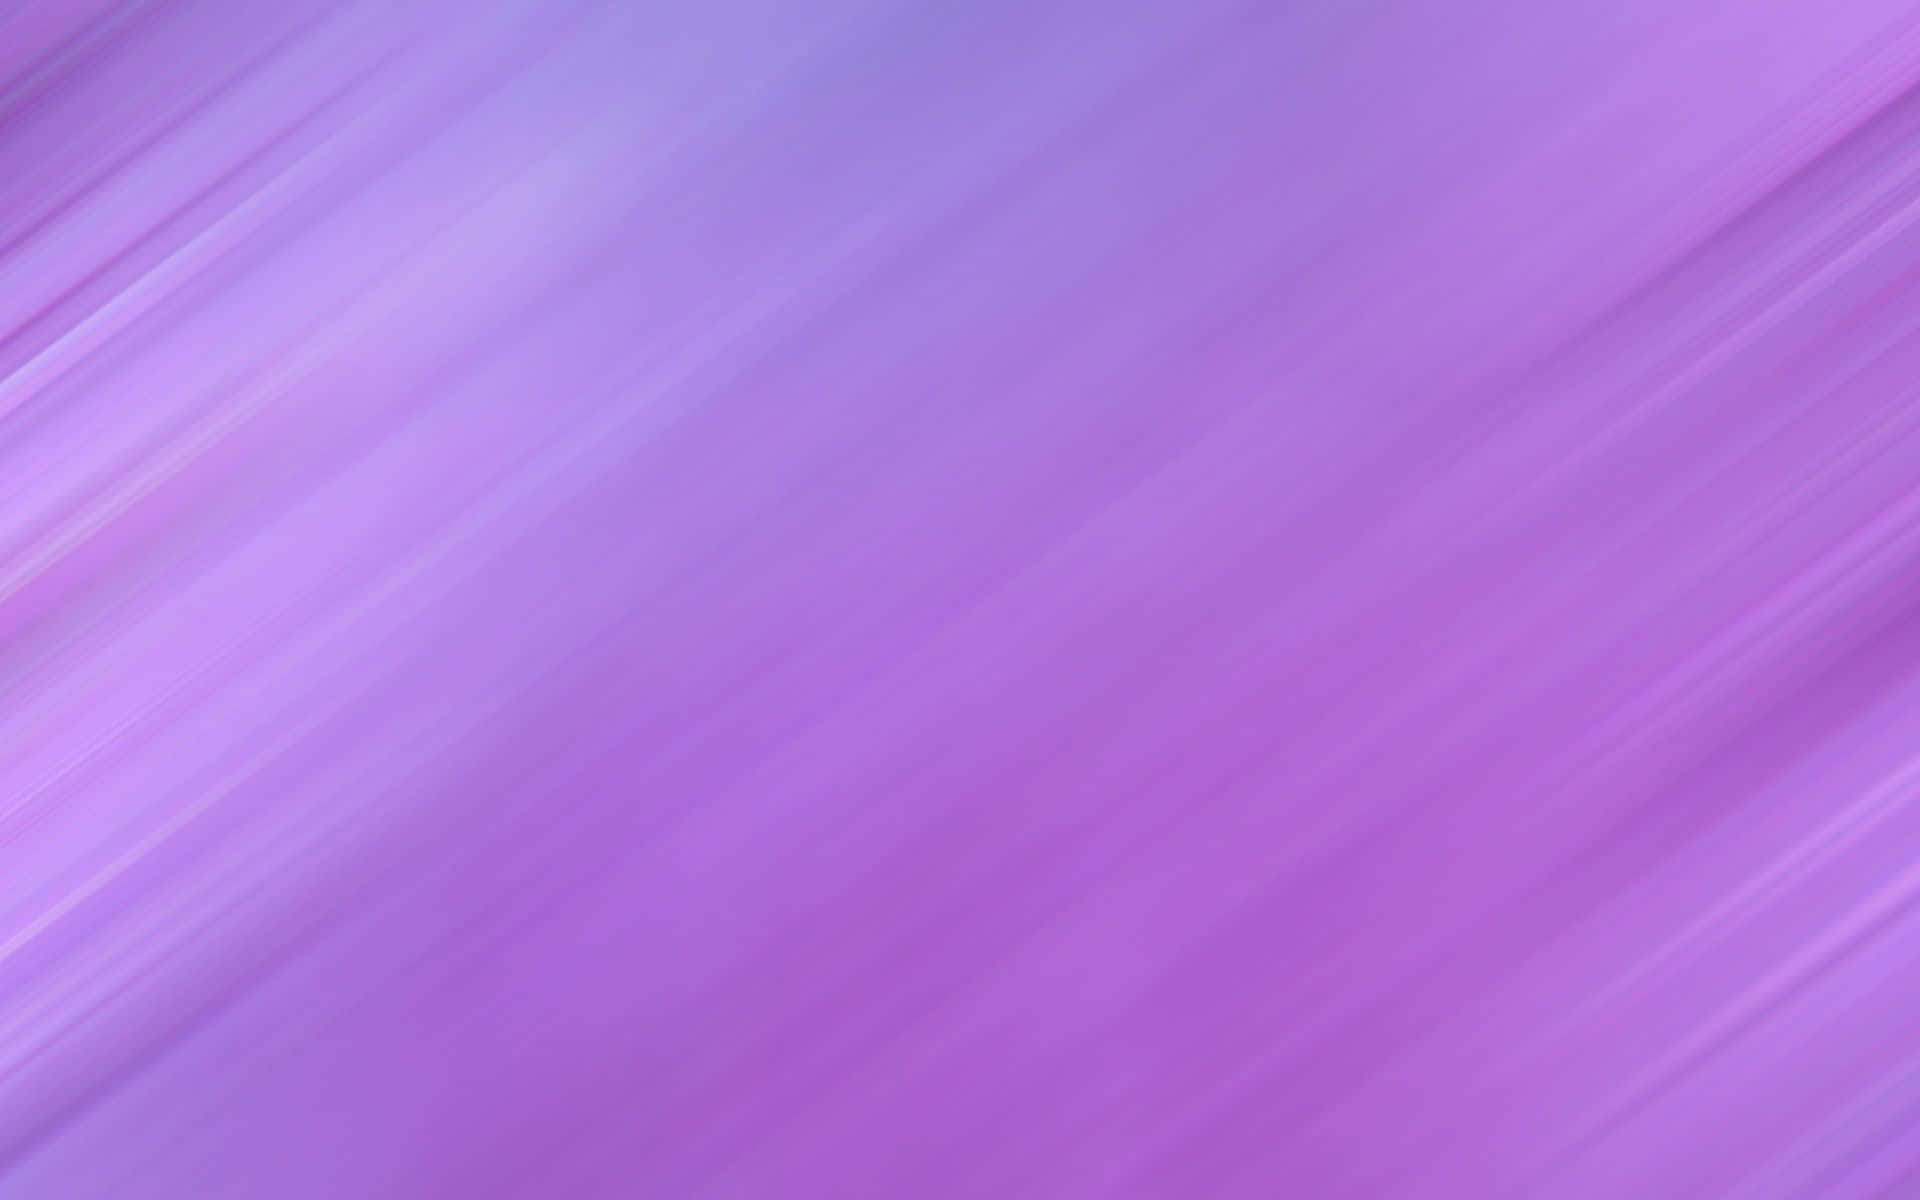 A calming light purple background with a soft, gentle texture.